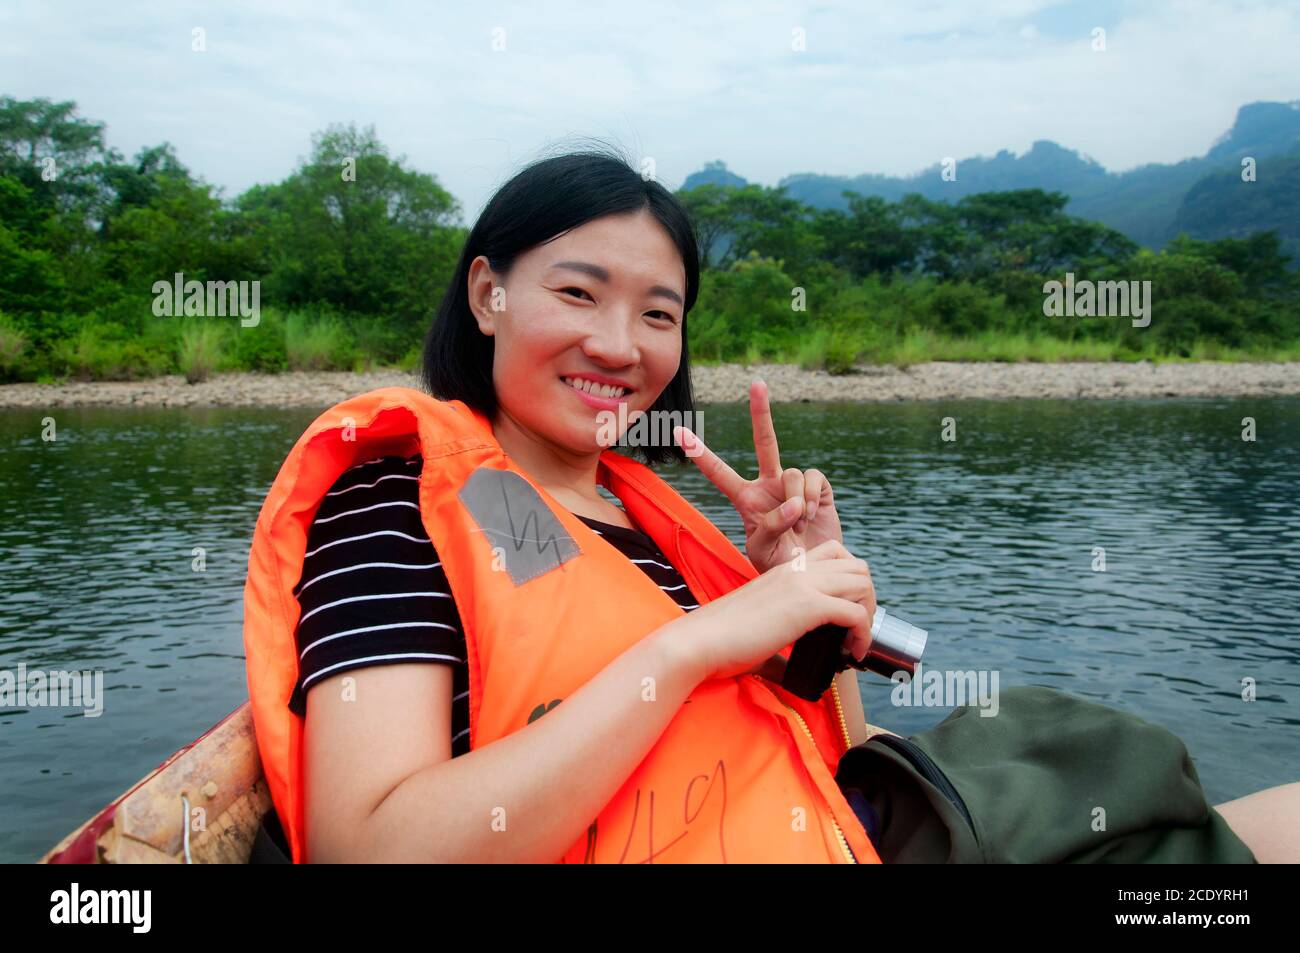 A chinese woman showing a peace sign holding a camera wearing an orange life vest on a bamboo raft on the nine bend river in wuyishan china on an over Stock Photo